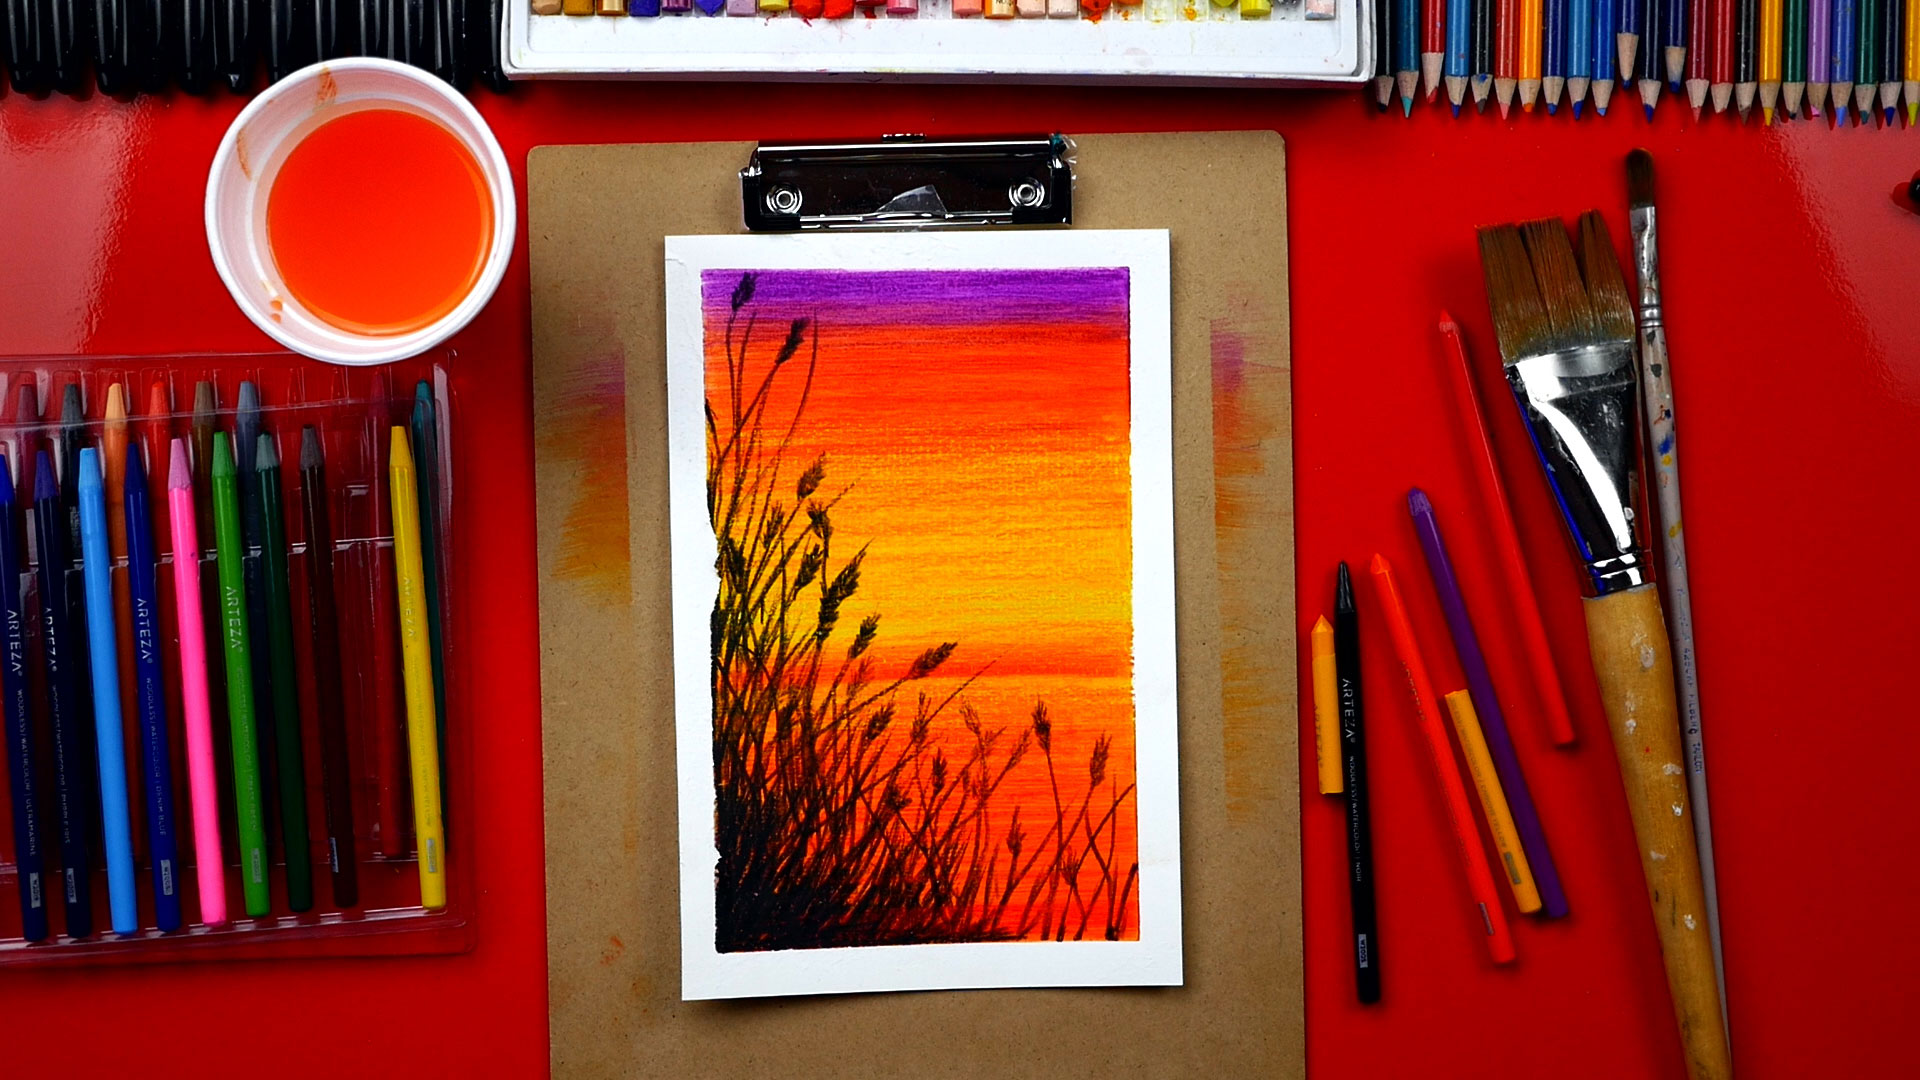 How to draw a sunset scenery with watercolor - YouTube